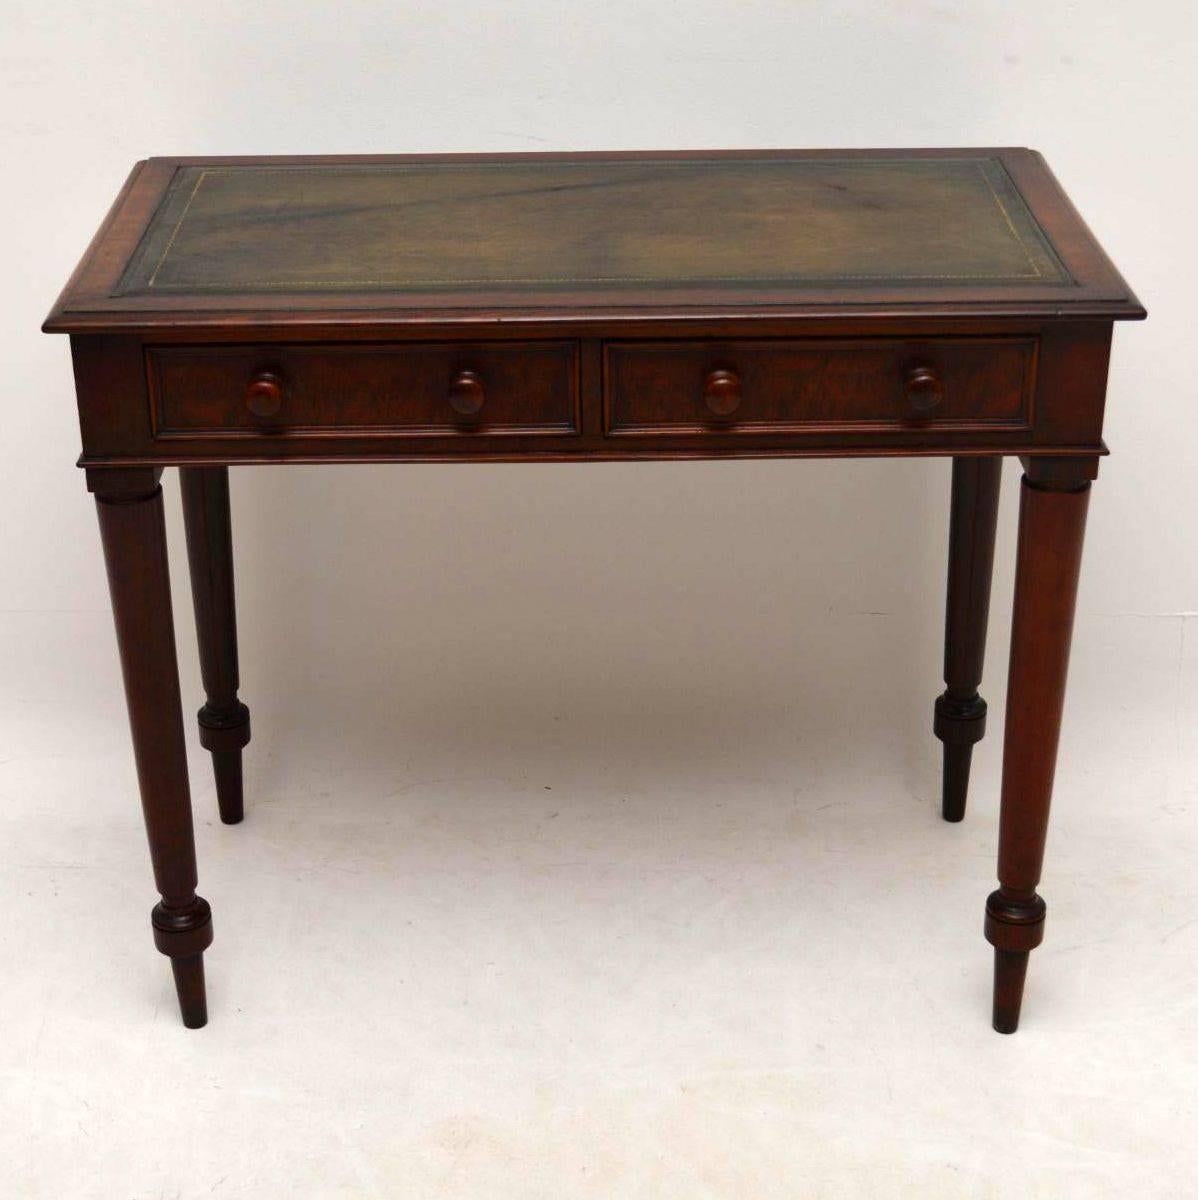 High quality antique early Victorian writing table desk, with a tooled leather writing surface, two drawers with bun handles and sitting on well turned legs. Its in excellent condition, circa 1840s-1860s period.

Measures: Length 36.2